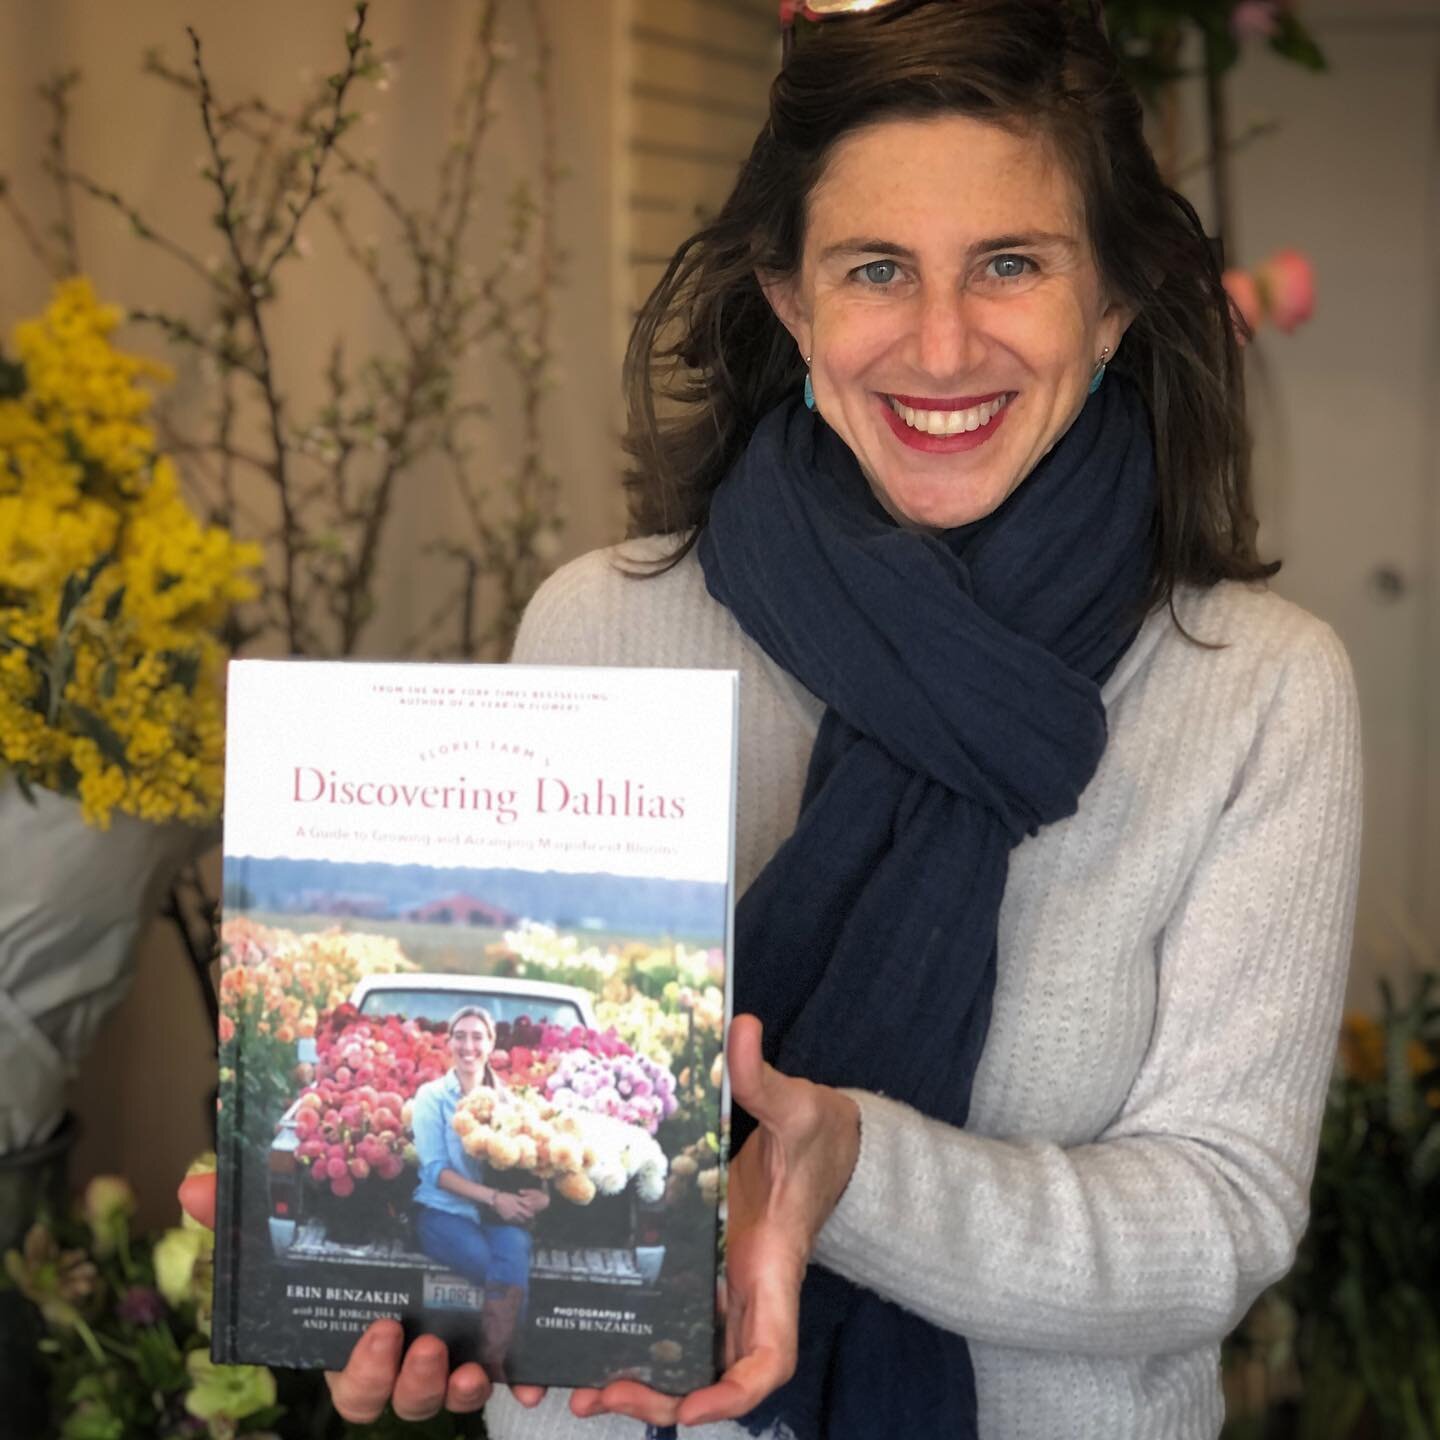 Happy book birthday to @floretflower on the publication of Discovering Dahlias! This book was five years in the making and is packed with deep content and gorgeous photos. Erin and her team bring such integrity, generosity and depth to everything the